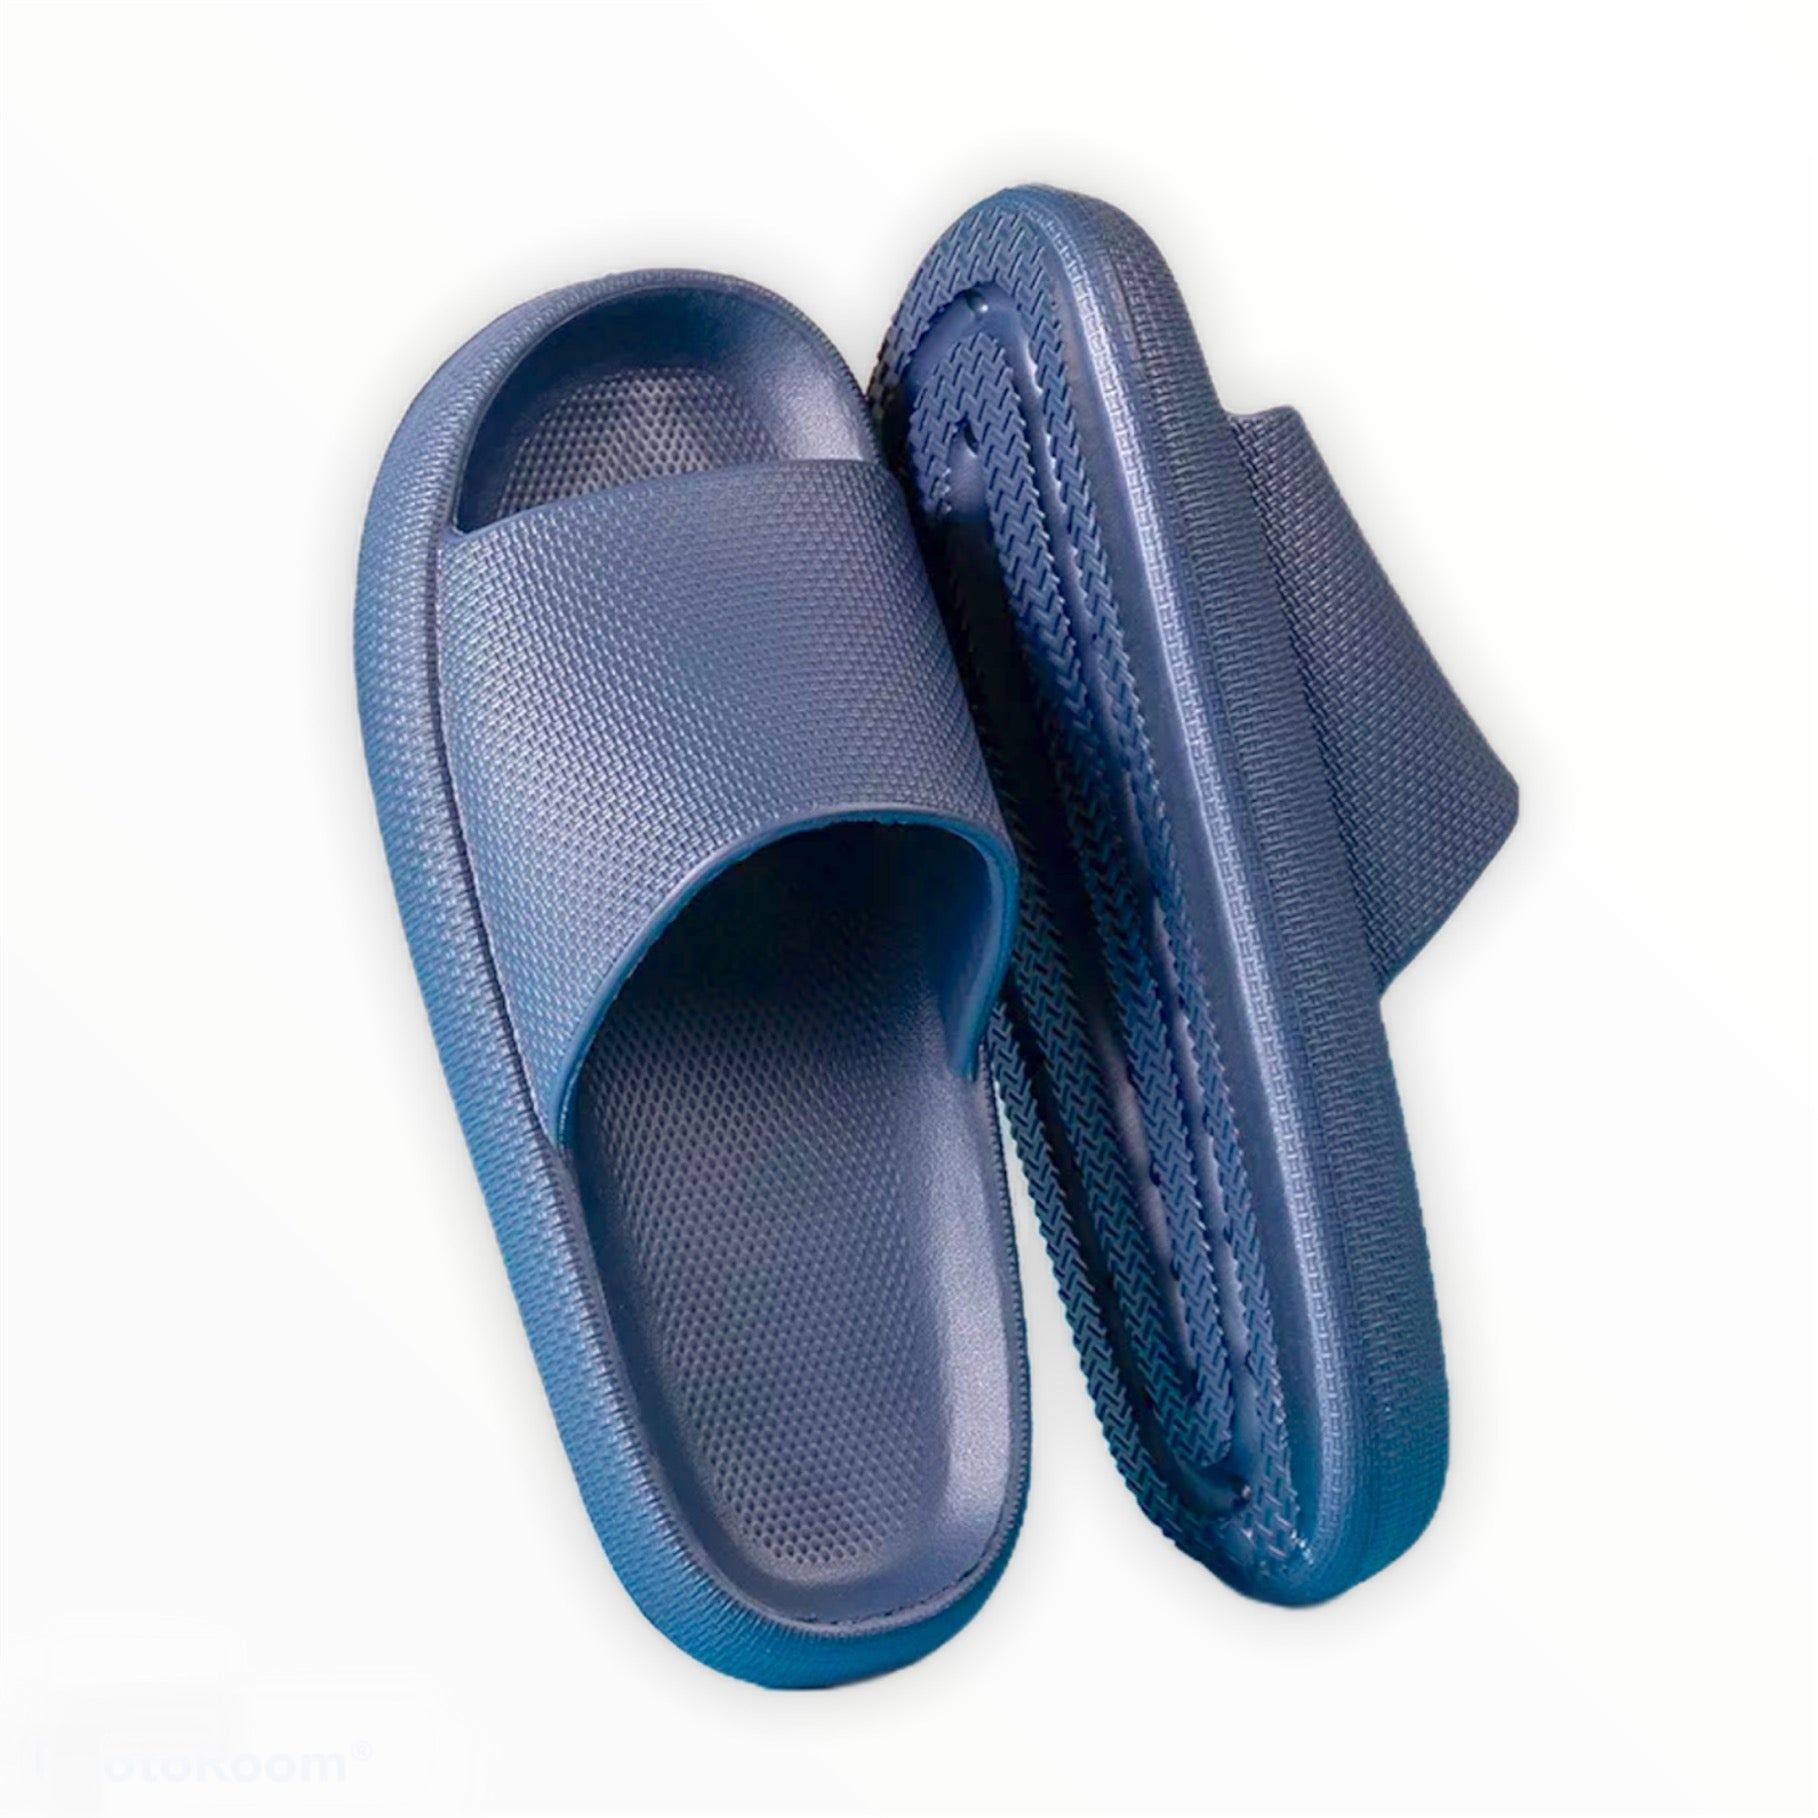 sootheze slippers, arch support slippers, anti-slip, washable sandals, hot girl fashion, summer beach sandals., thick sole slippers, best selling sandals, navy blue sandals, gift for father, husband, coolest slippers.